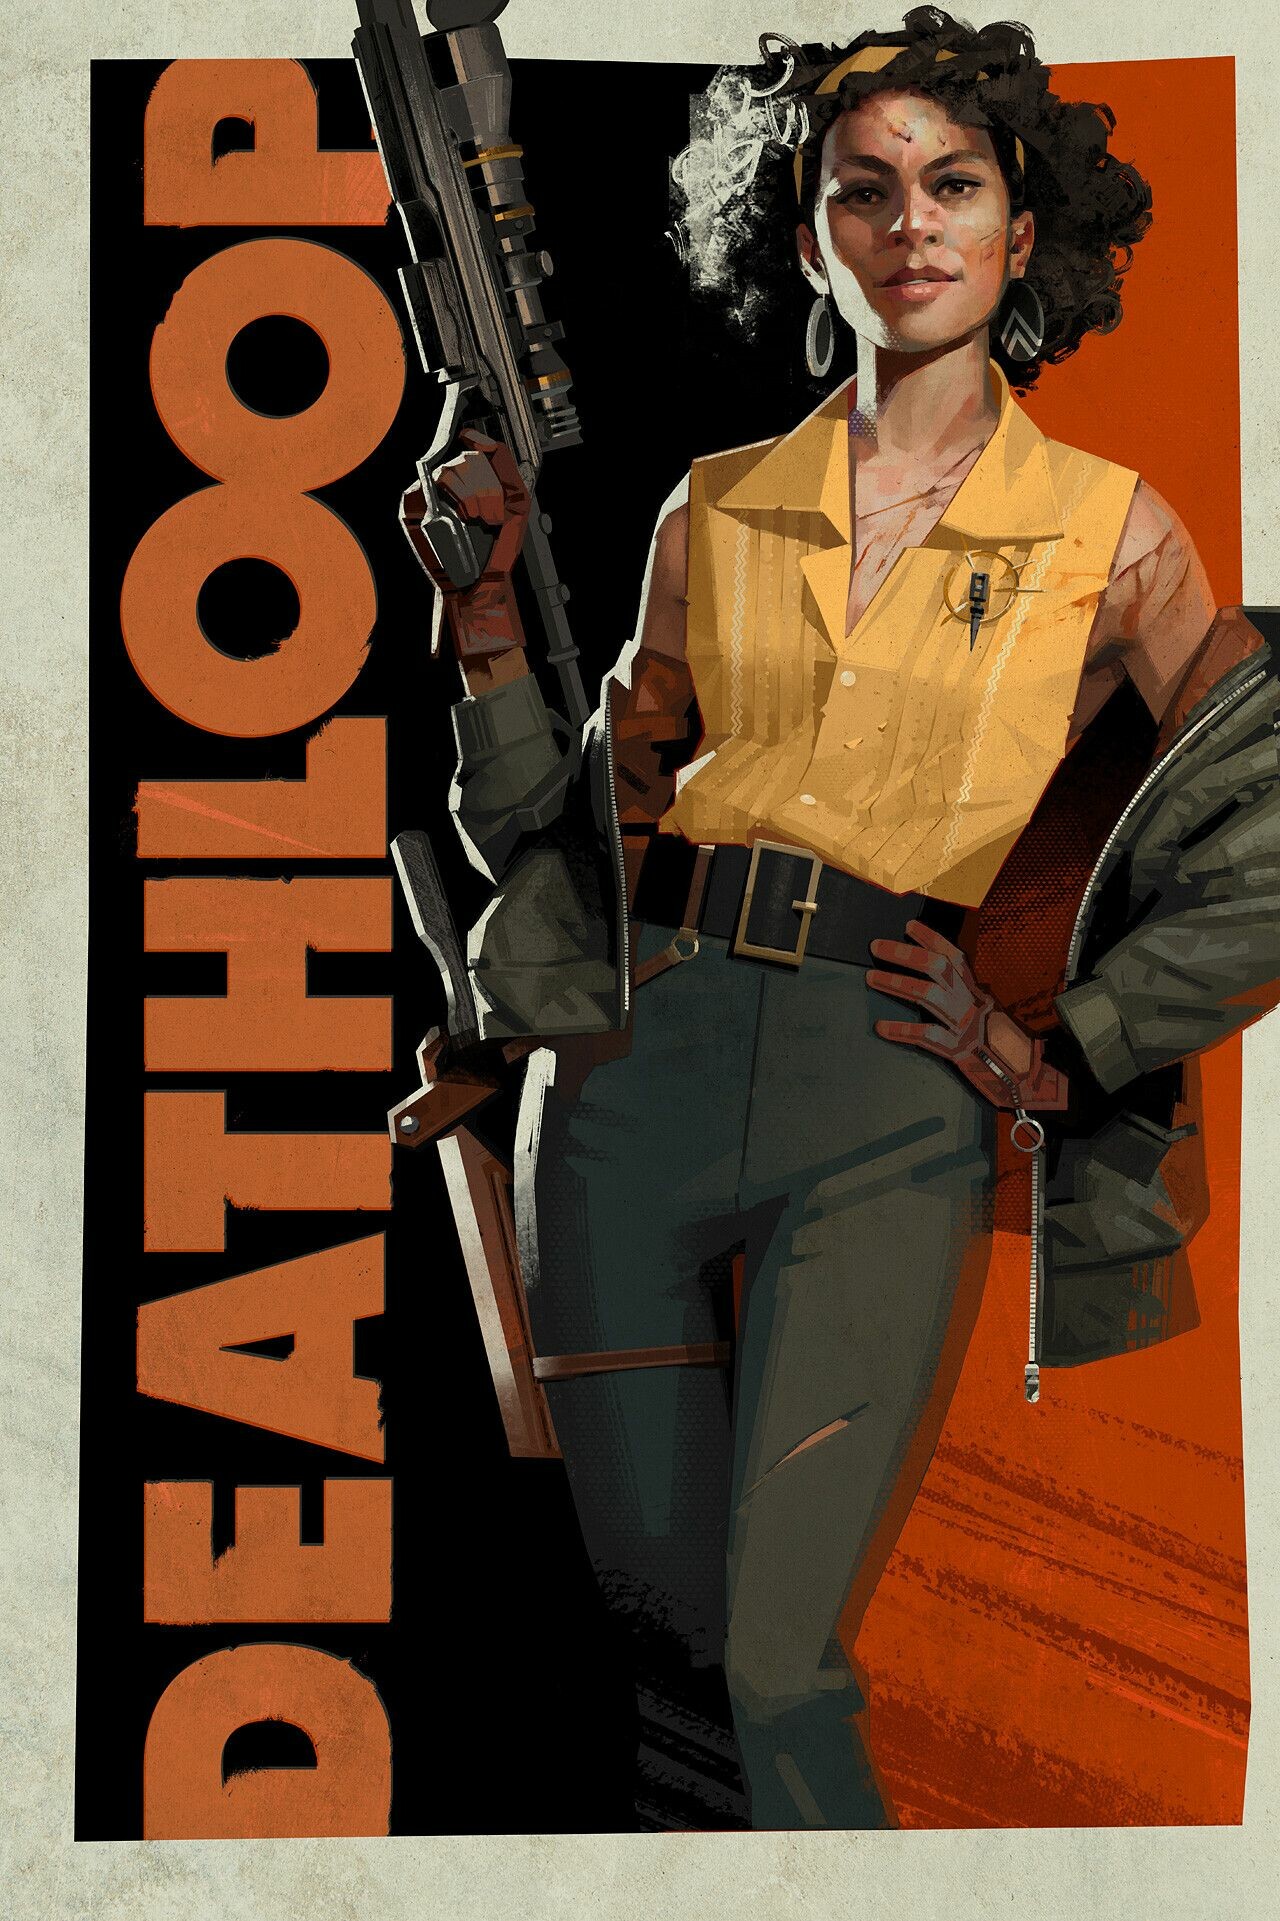 Deathloop: A murder puzzle that the player needs to figure out how to solve in one perfect run after failing through many previous runs. 1280x1930 HD Wallpaper.